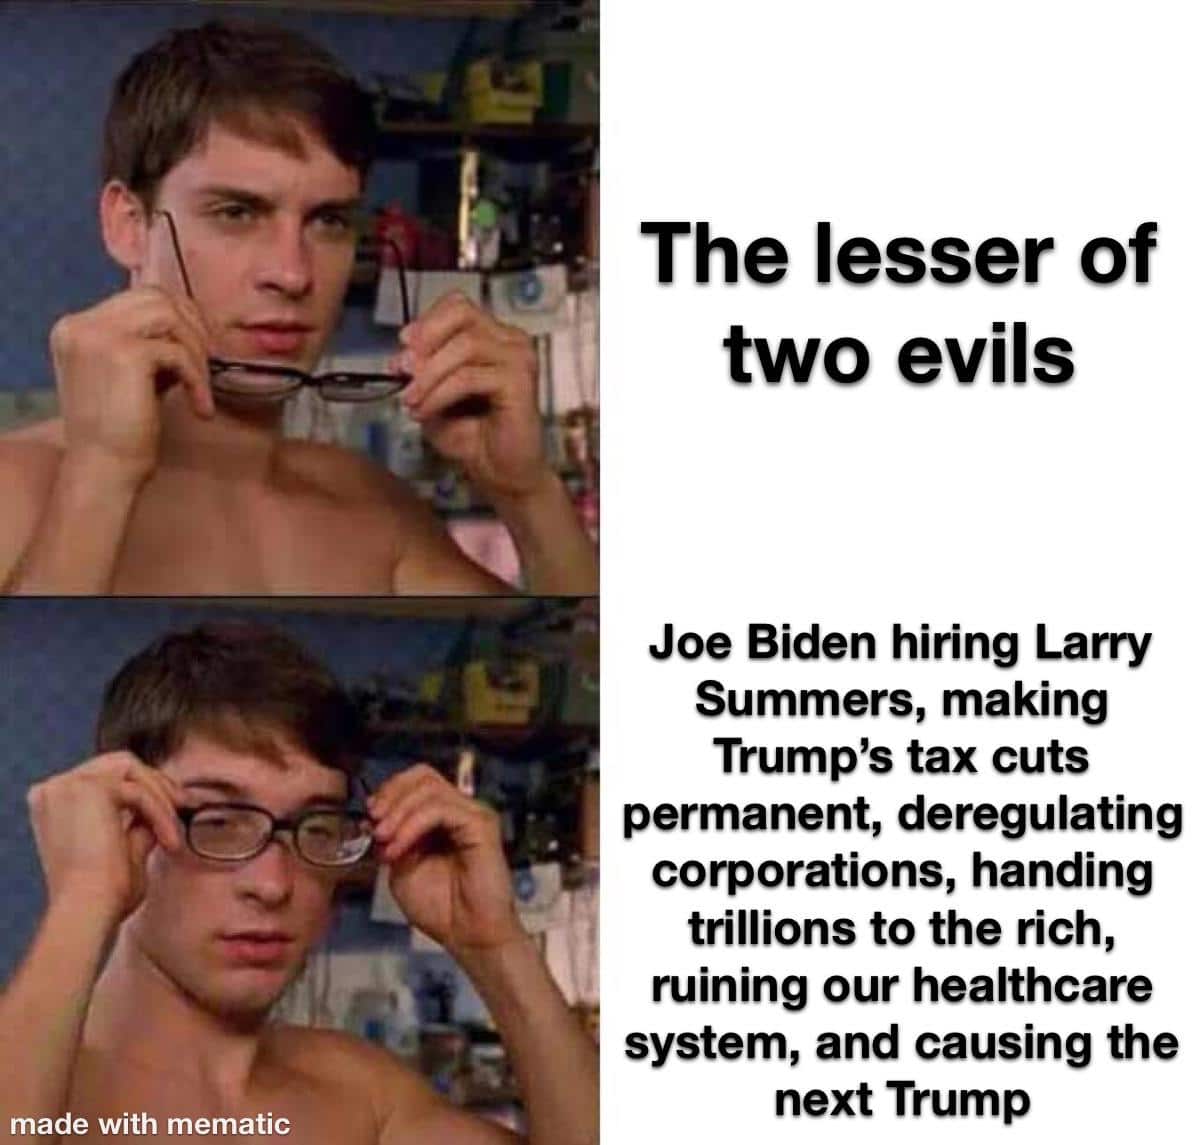 Political, Trump, Obama, Biden, Wall Street, Dems Political Memes Political, Trump, Obama, Biden, Wall Street, Dems text: -1 made with mematic The lesser Of two evils Joe Biden hiring Larry Summers, making Trump's tax cuts permanent, deregulating corporations, handing trillions to the rich, ruining our healthcare system, and causing the next Trump 